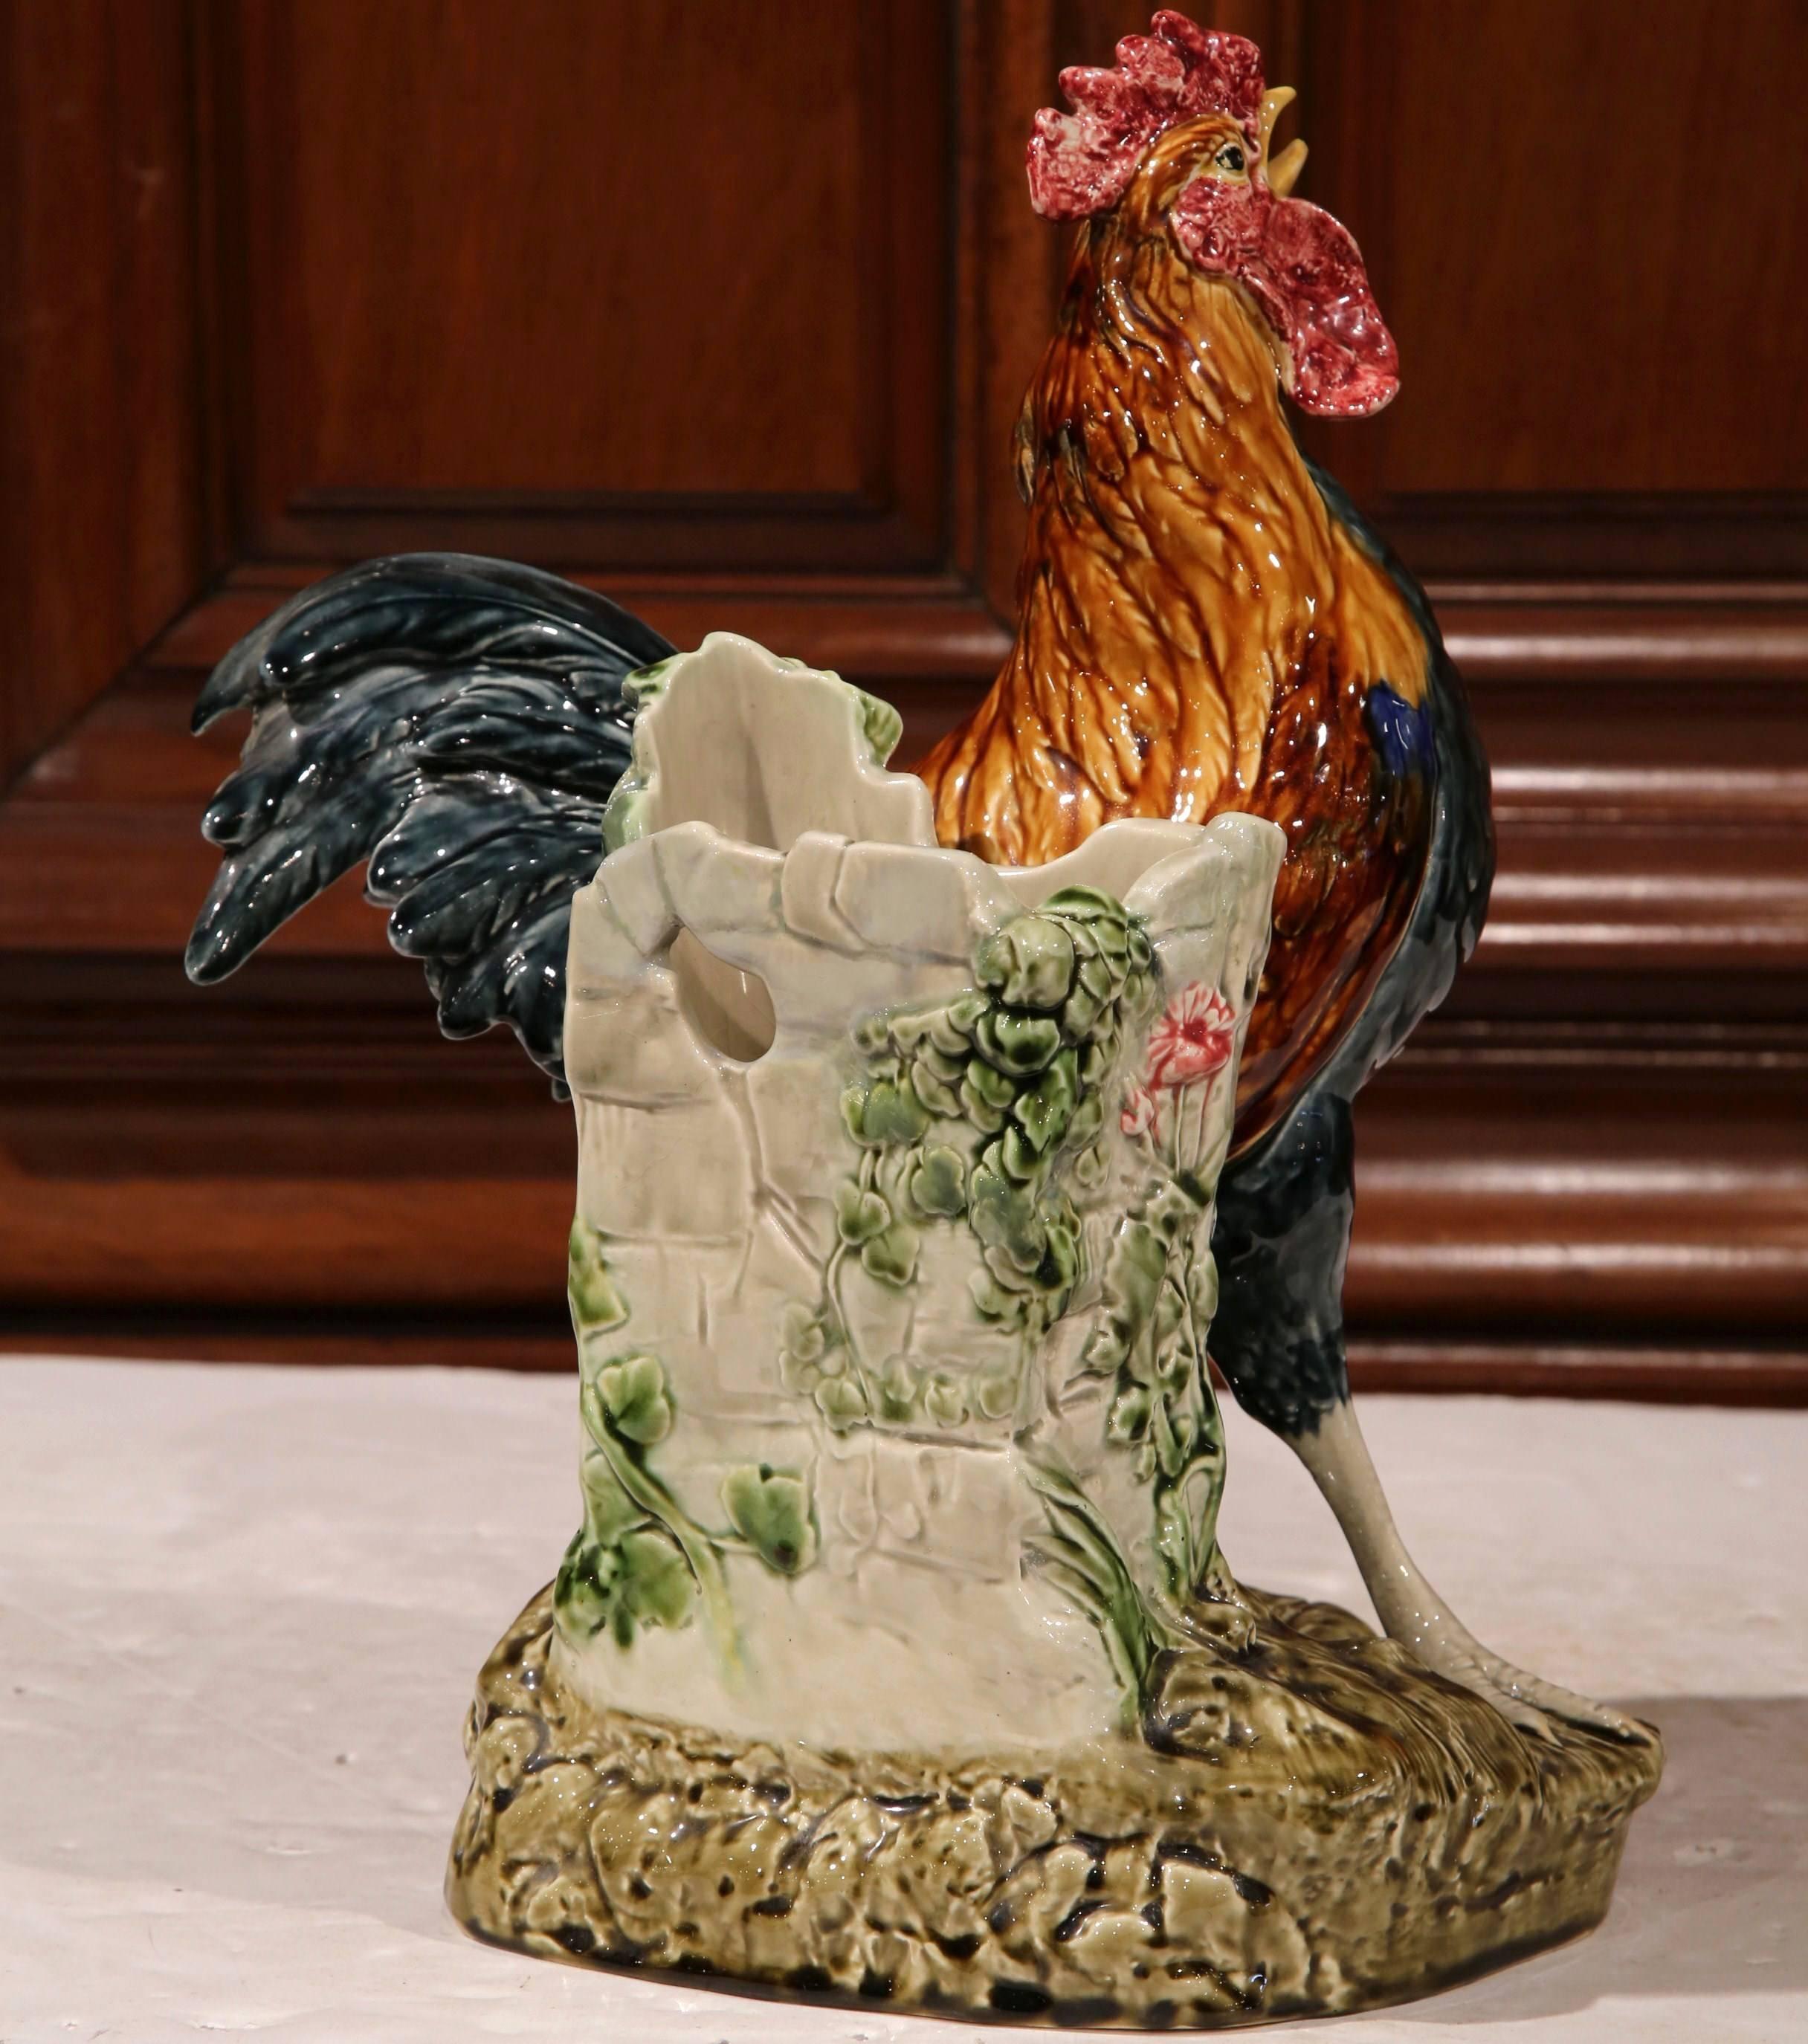 19th Century French Hand-Painted Faience Rooster Vase Signed Carrier-Belleuse 3